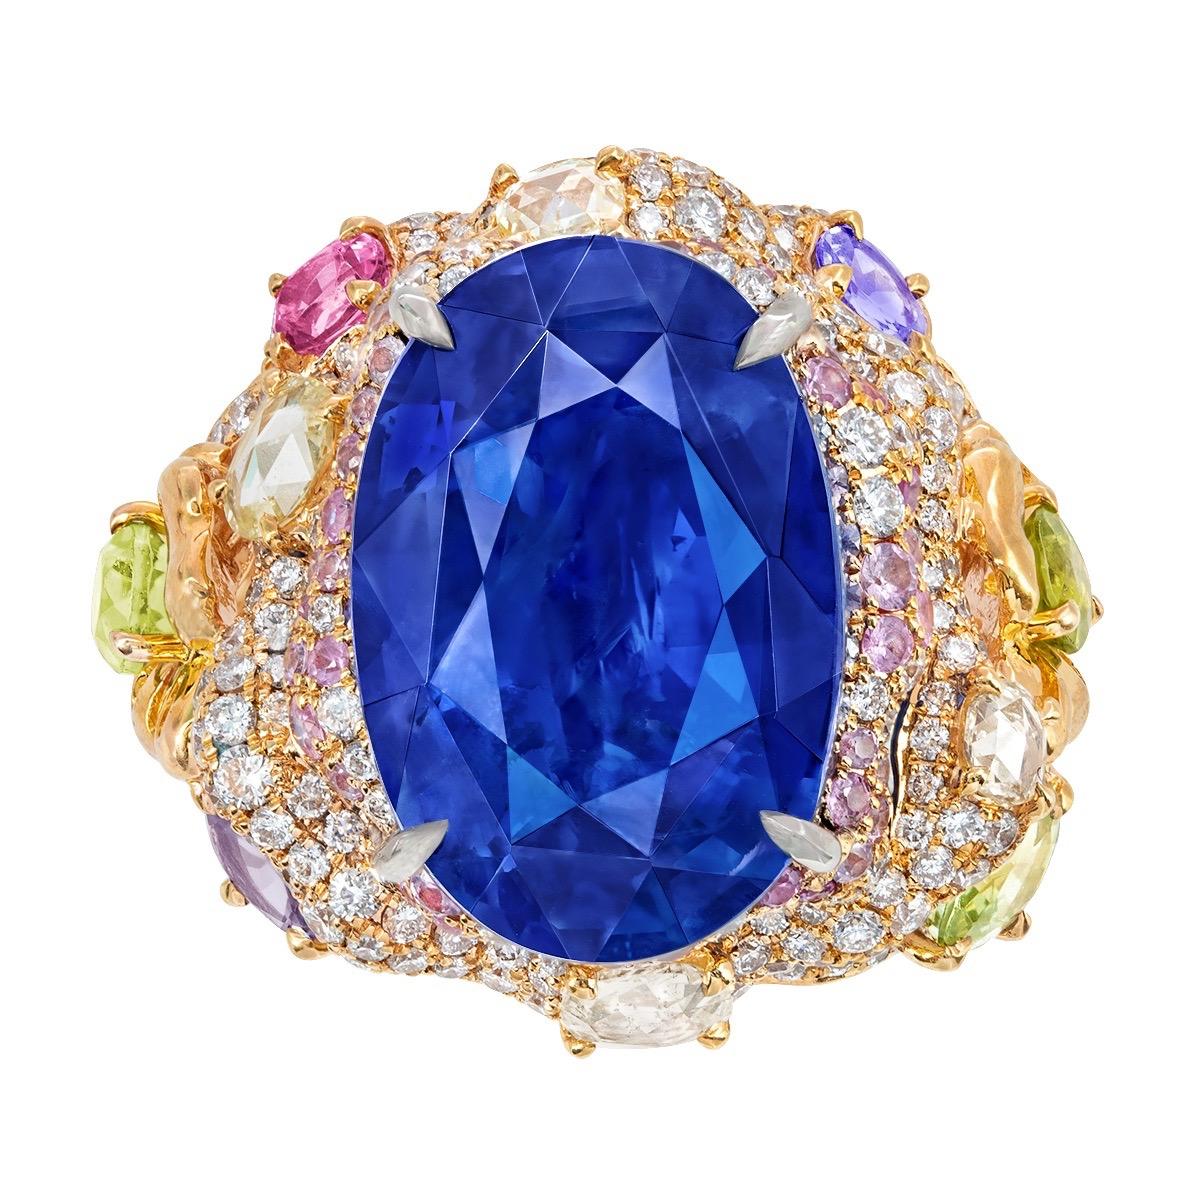 From the Museum vault at Emilio Jewelry, Located On New York’s Iconic Fifth Avenue:
Showcasing a magnificent natural Grs certified no heat ceylon sapphire weighing over 20 carats! Set in a very special custom designed extravagant mounting details